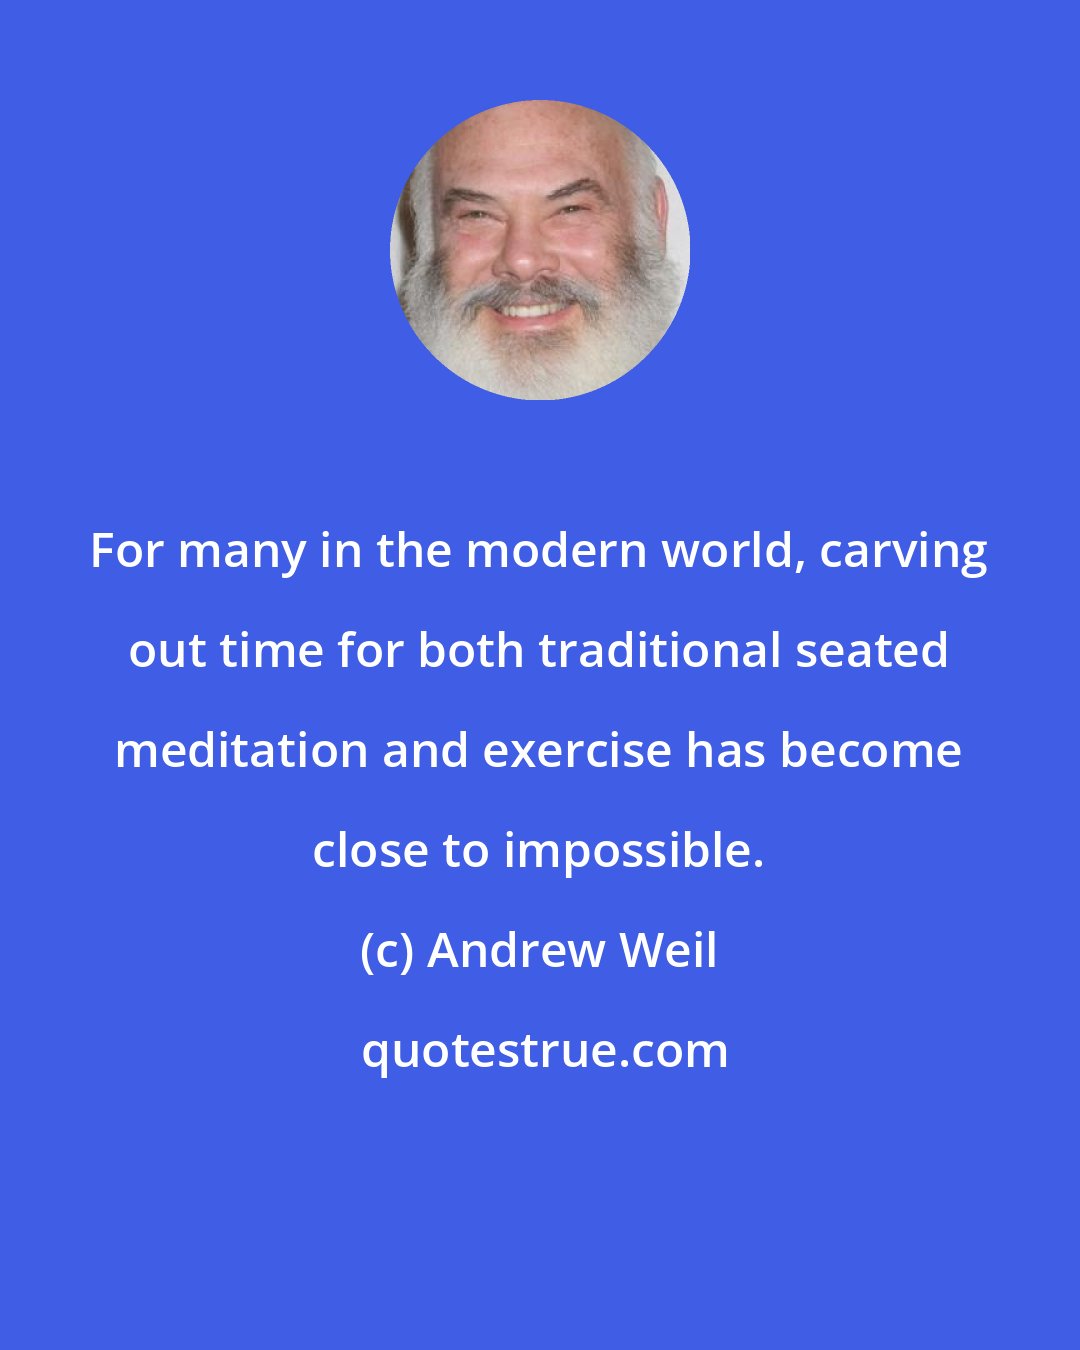 Andrew Weil: For many in the modern world, carving out time for both traditional seated meditation and exercise has become close to impossible.